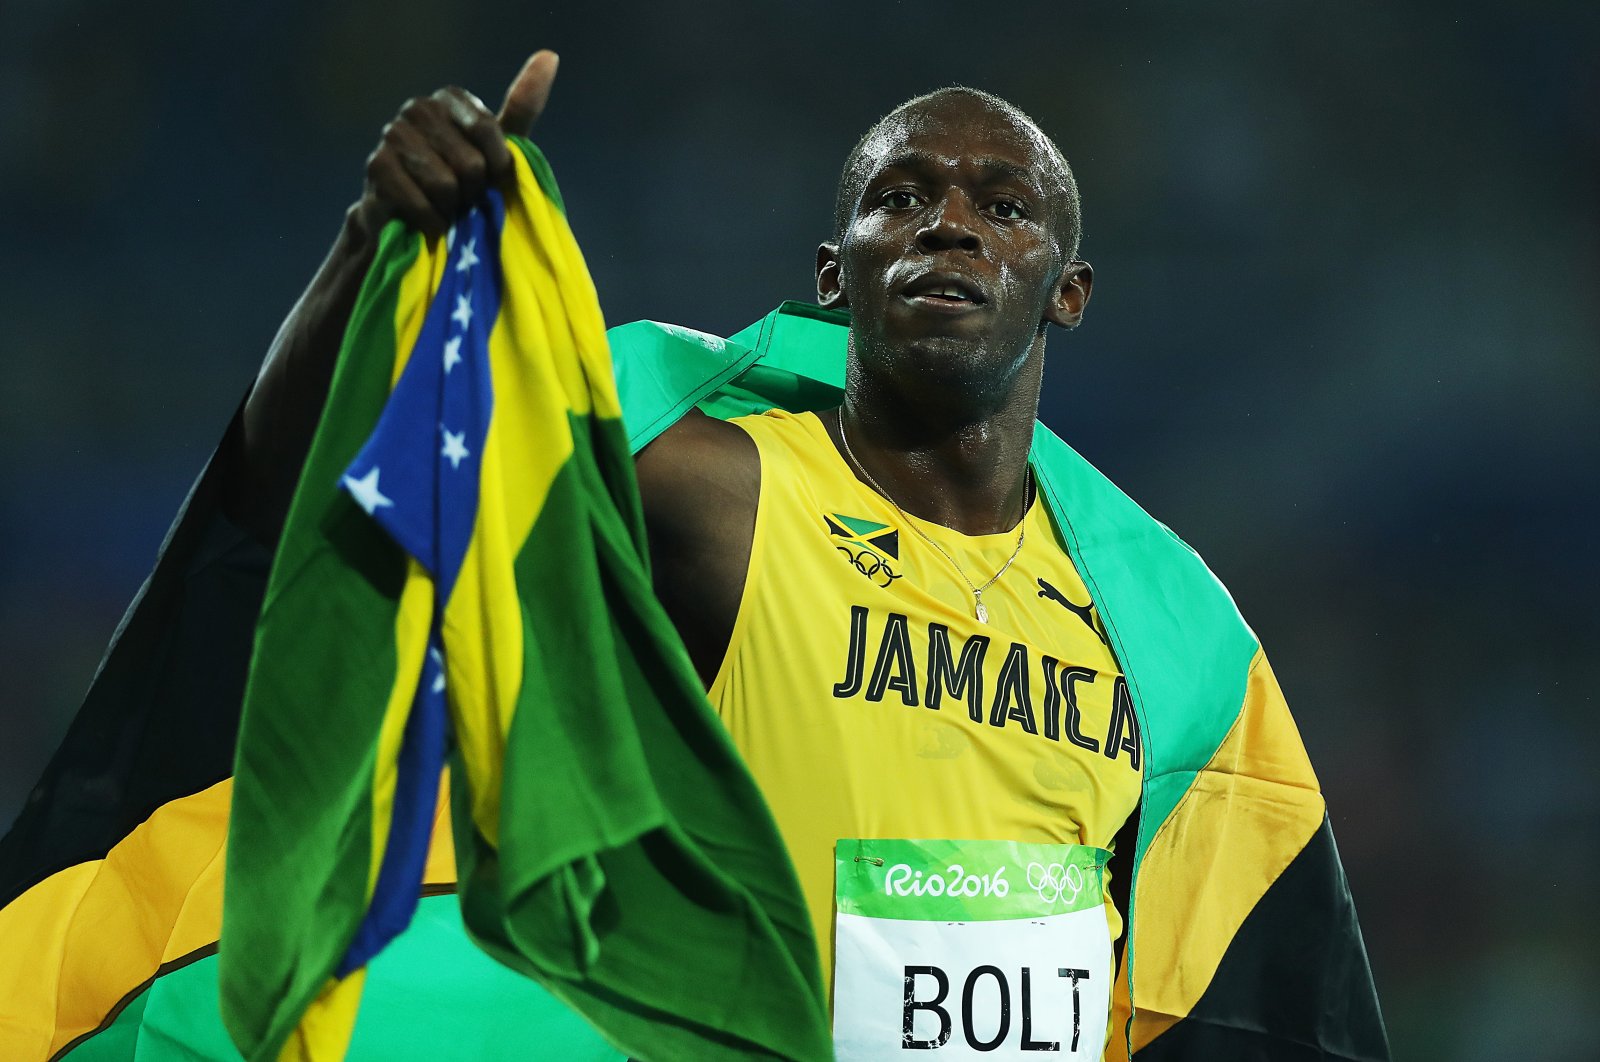 Usain Bolt of Jamaica celebrates after he wins gold in the final of the Men&#039;s 200m on Day 13 of the Rio 2016 Olympic Games at the Olympic Stadium. Rio de Janeiro, Brazil, Aug. 18, 2016 (Getty Images Photo)